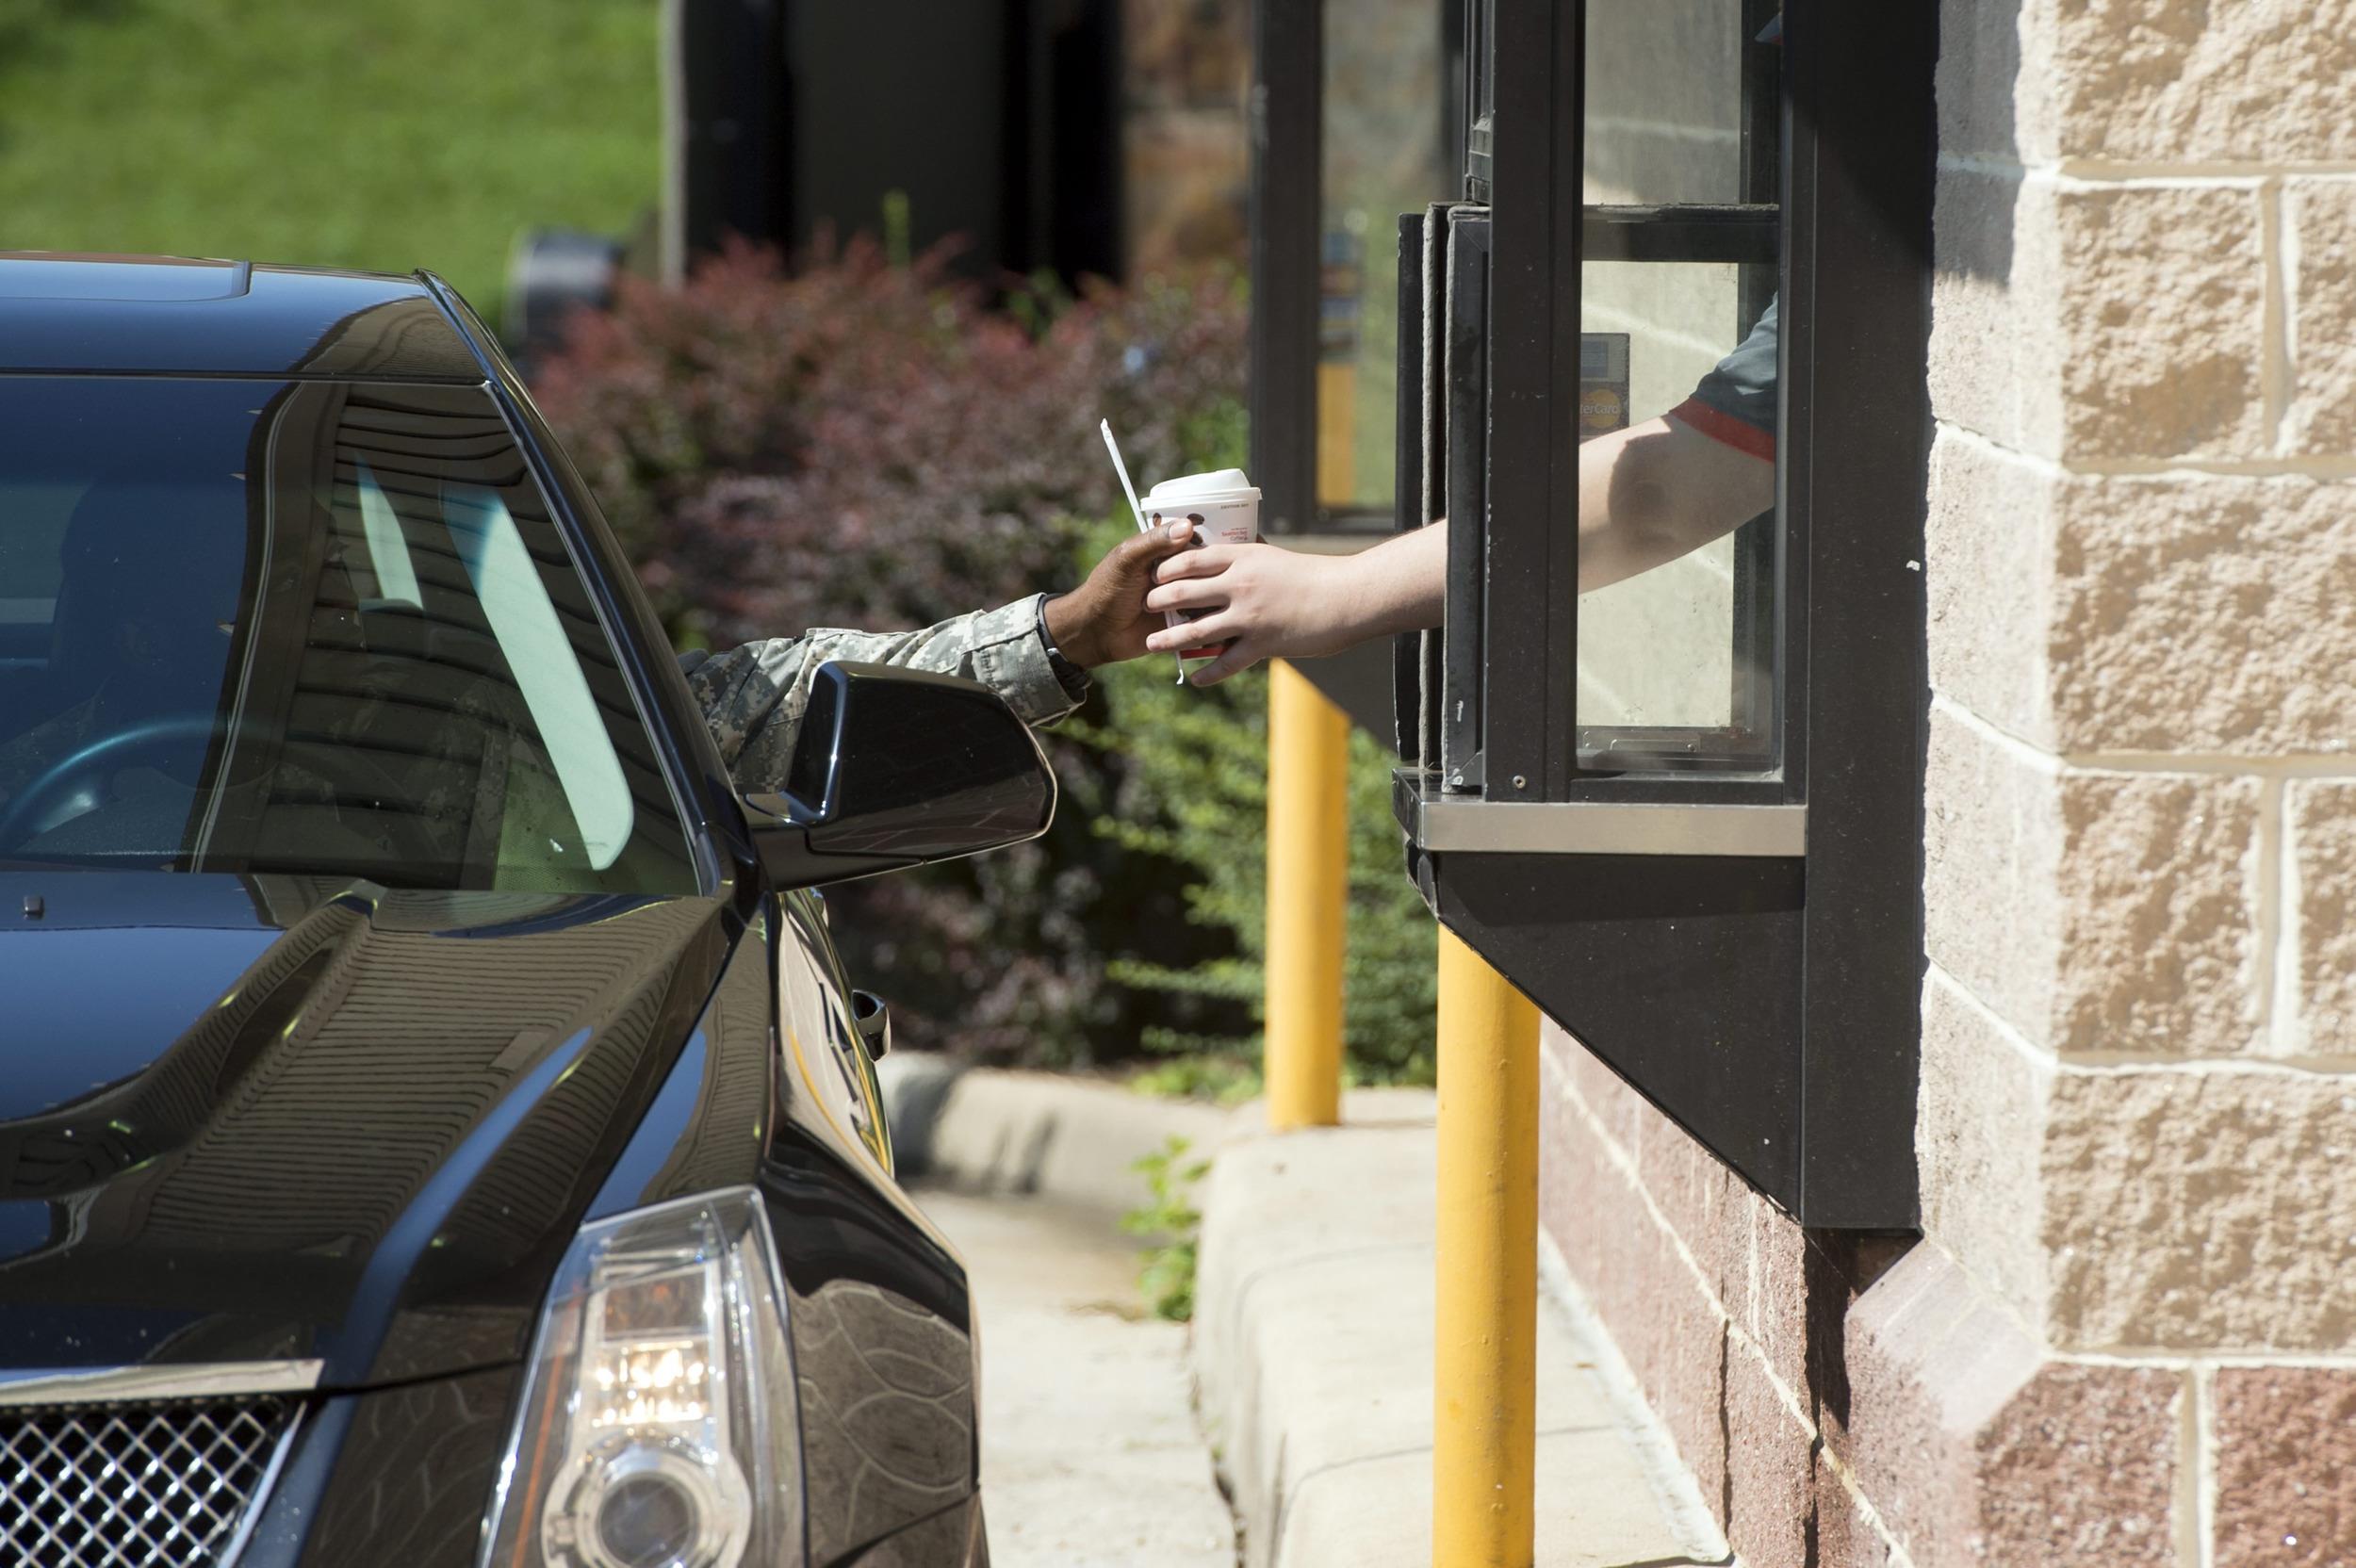 Do you say "Thank you!" even in the fast food drive-thru ...